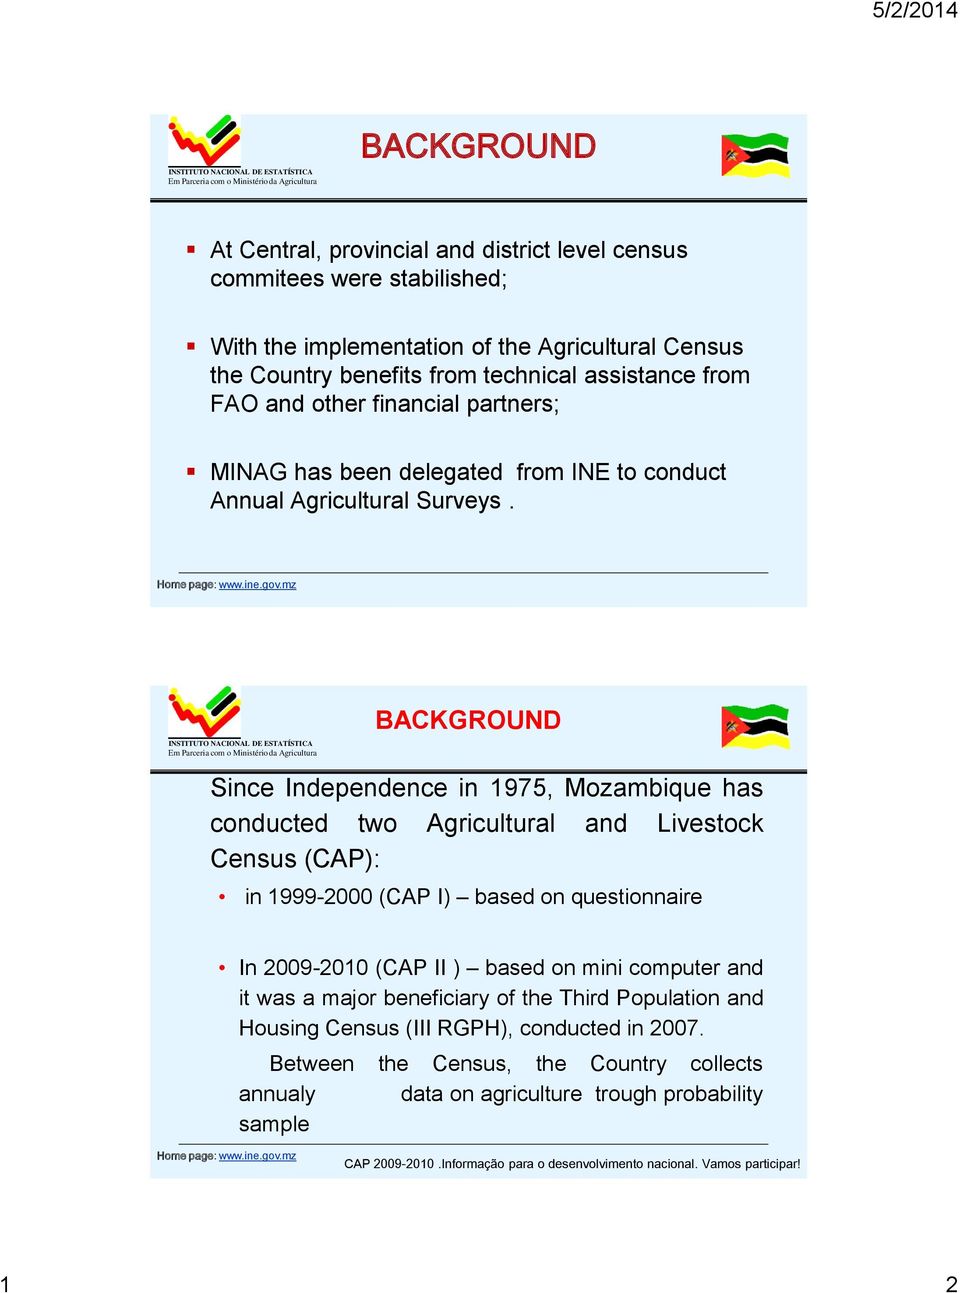 BACKGROUND Since Independence in 1975, Mozambique has conducted two Agricultural and Livestock Census (CAP): in 1999-2000 (CAP I) based on questionnaire In 2009-2010 (CAP II )